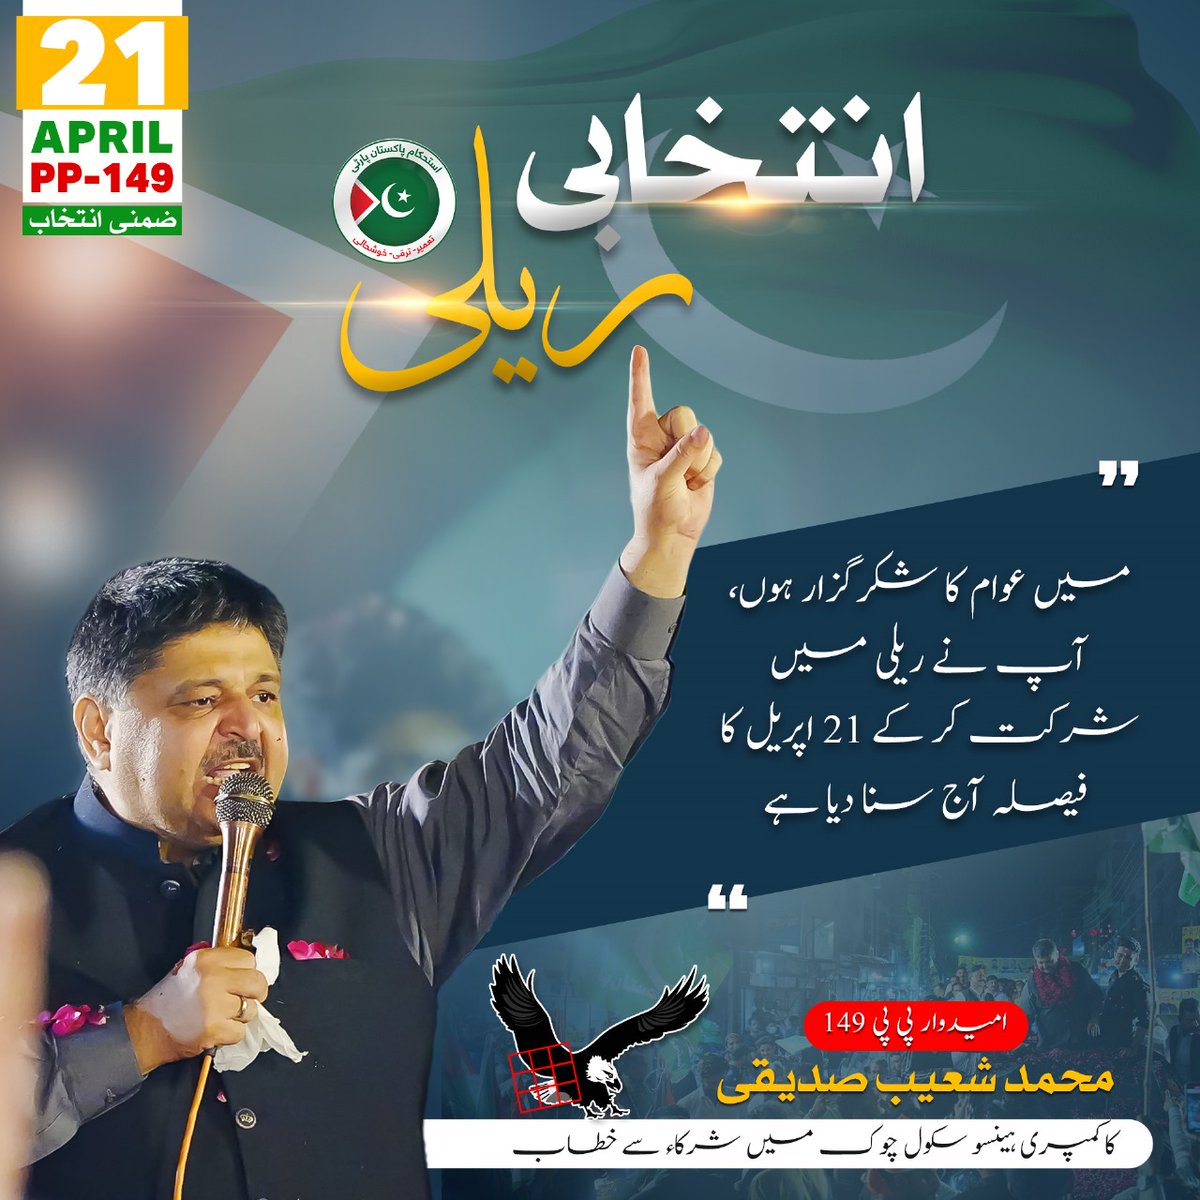 Gratitude to the energetic attendees of the PP-149 rally! Your passion fuels the movement for positive change led by Shoaib Siddiqui. Let's continue to stand united for progress and prosperity! #ShoaibSiddiquiPP149Rally